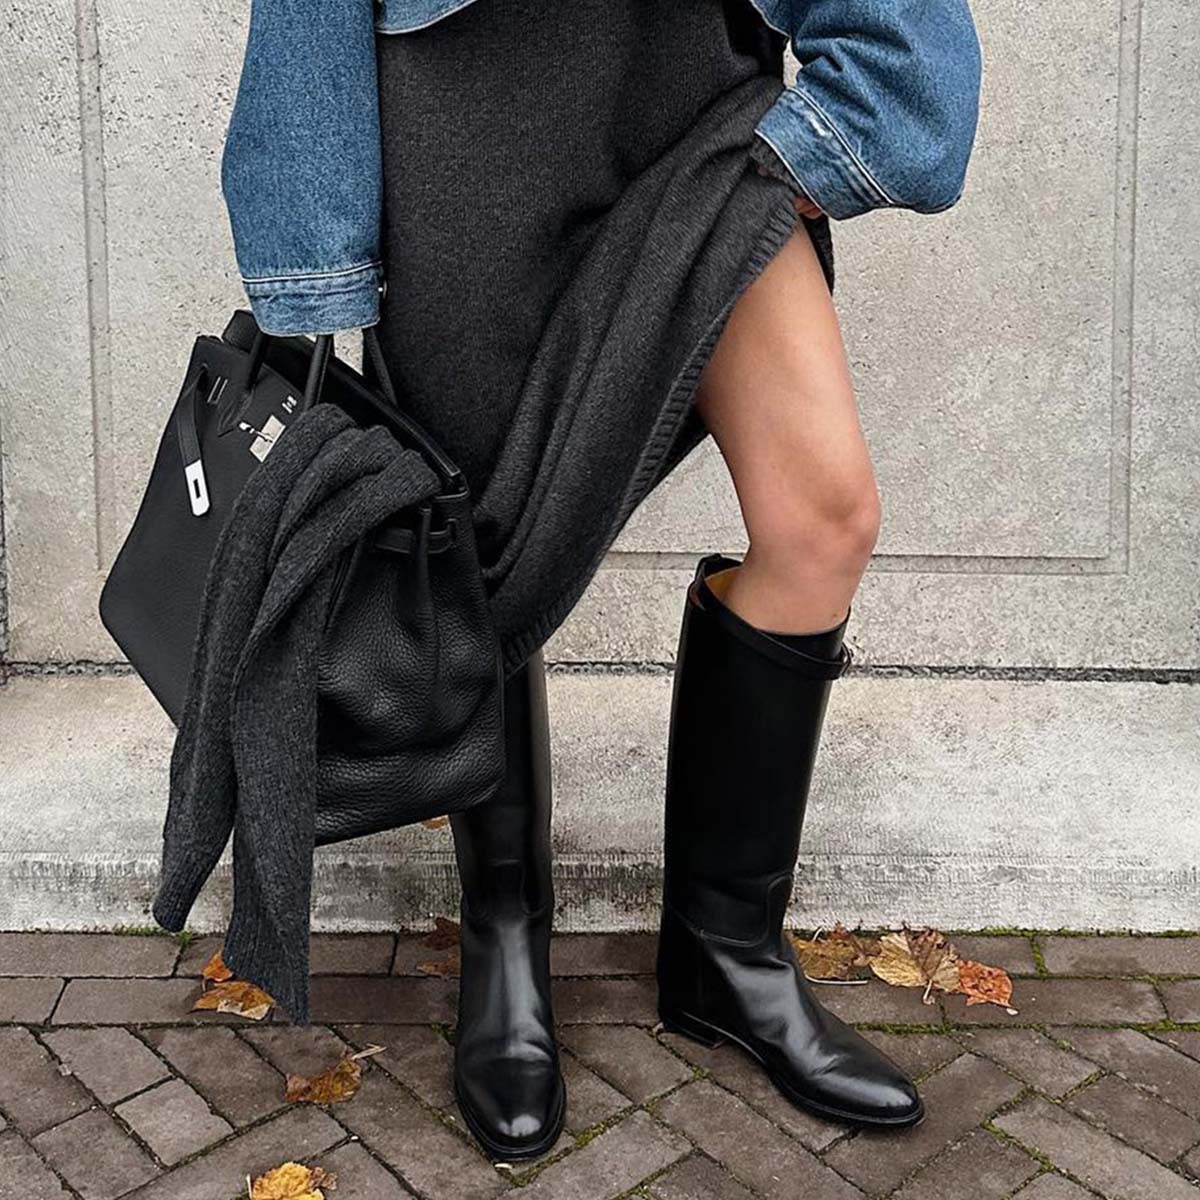 Faux Suede & Neoprene Tall Boots